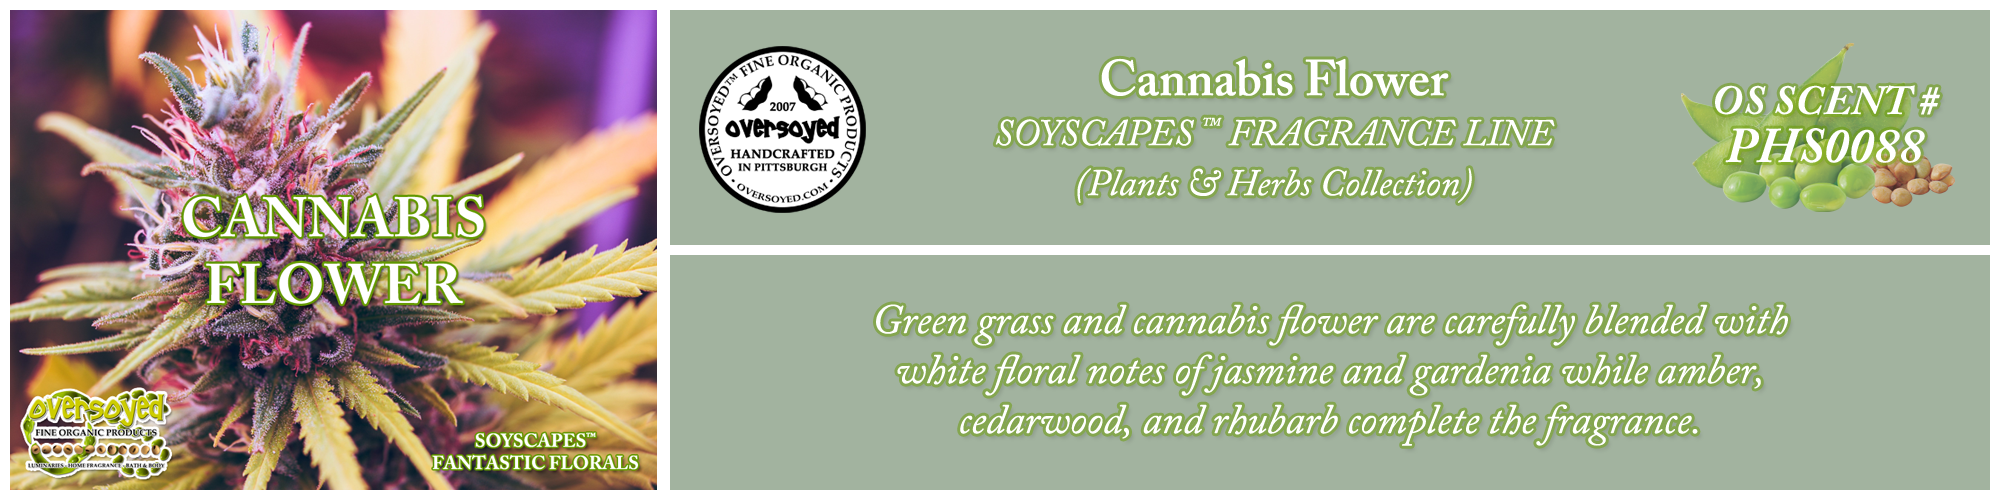 Cannabis Flower Handcrafted Products Collection